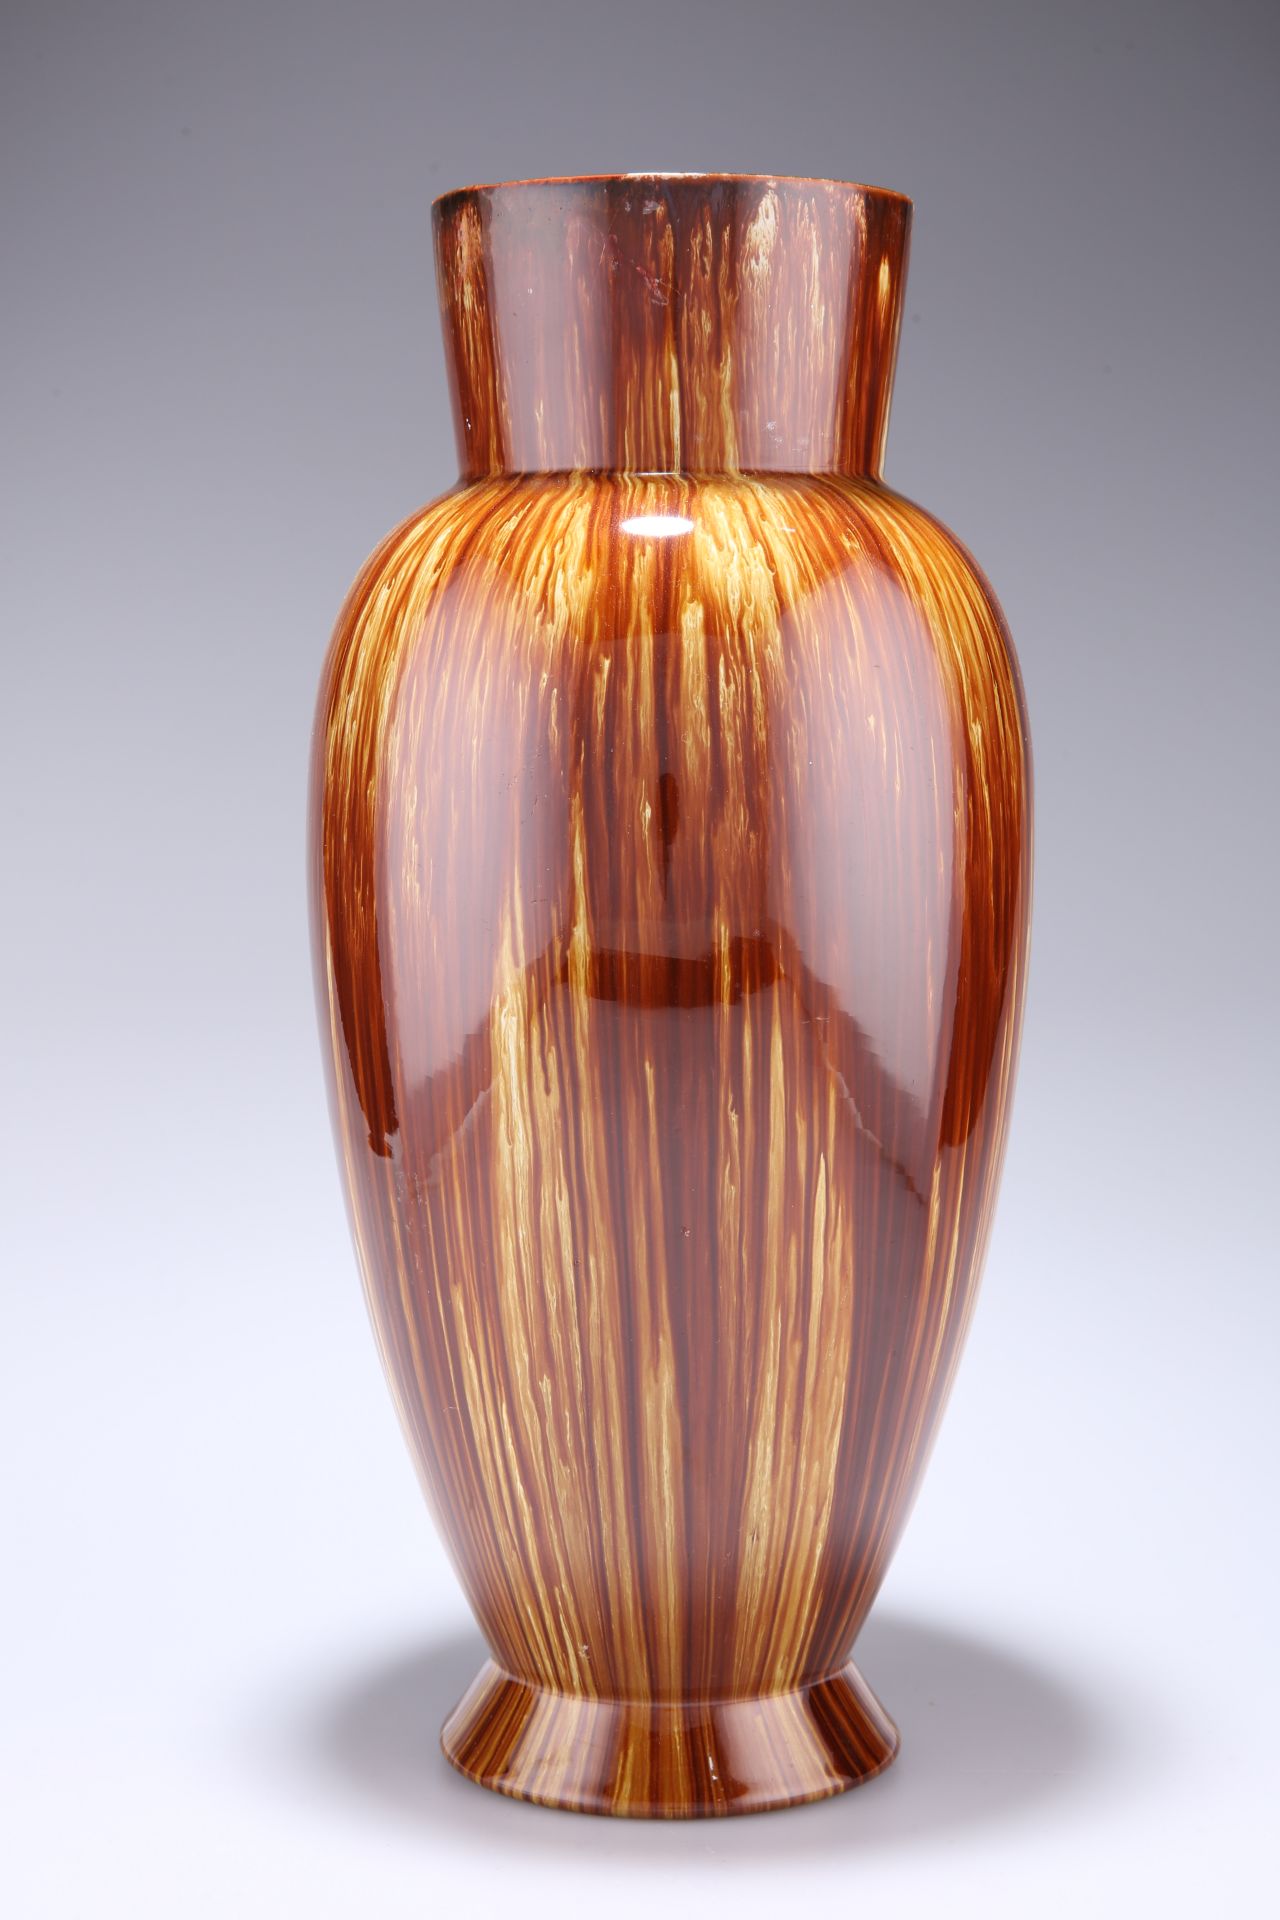 A LARGE LINTHORPE POTTERY VASE, of baluster form, with streaky brown glaze, impressed no. 477 and